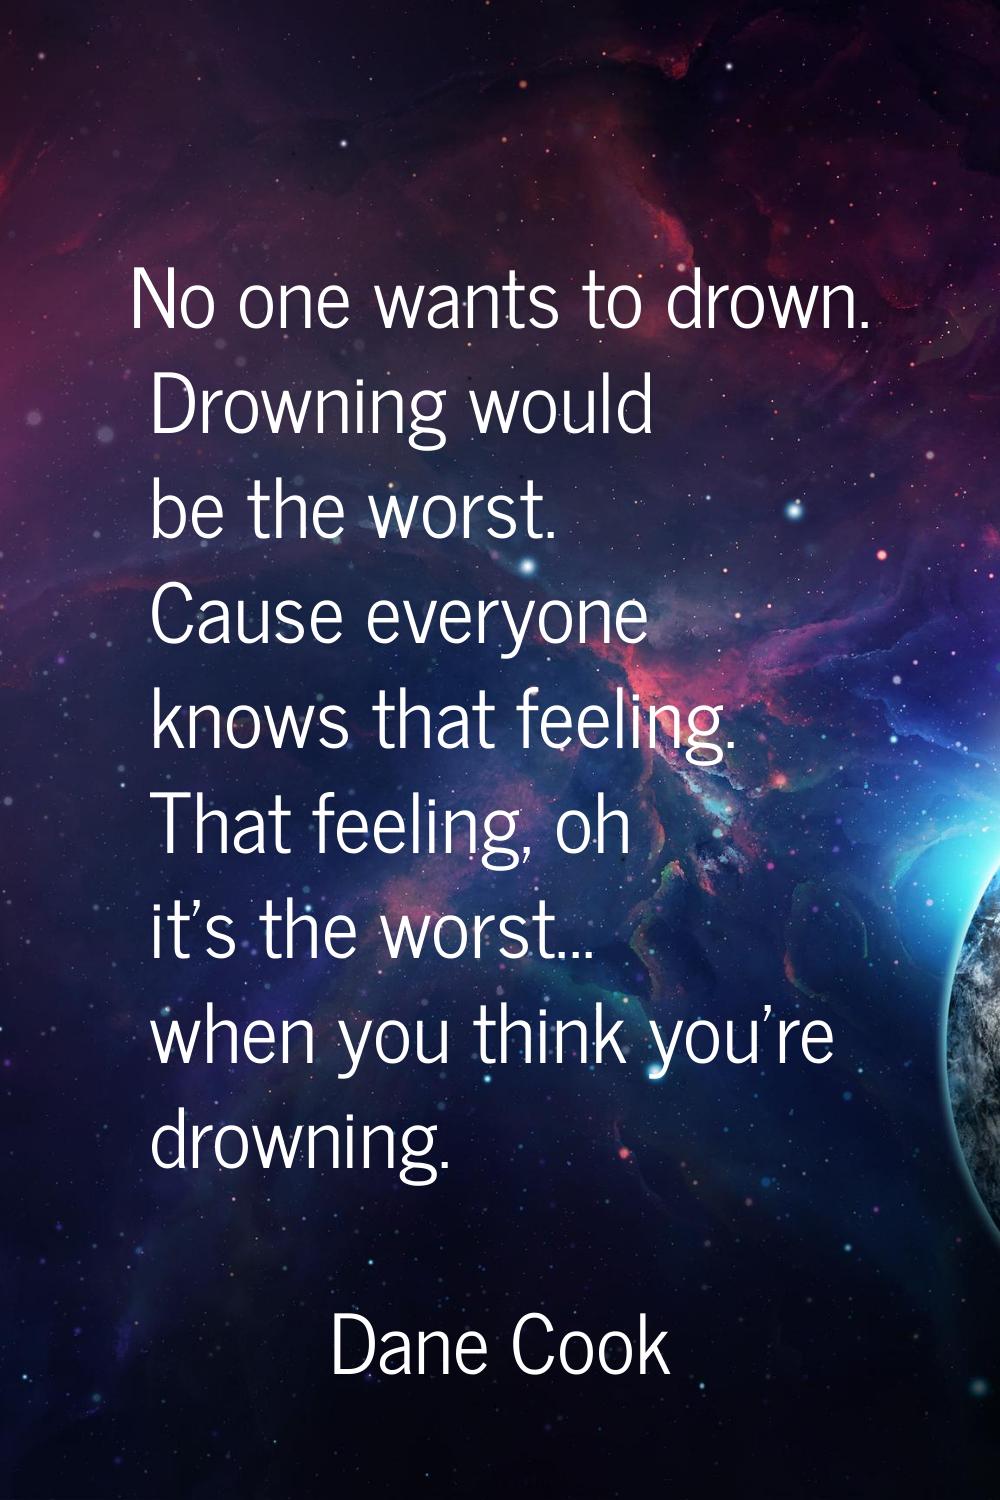 No one wants to drown. Drowning would be the worst. Cause everyone knows that feeling. That feeling